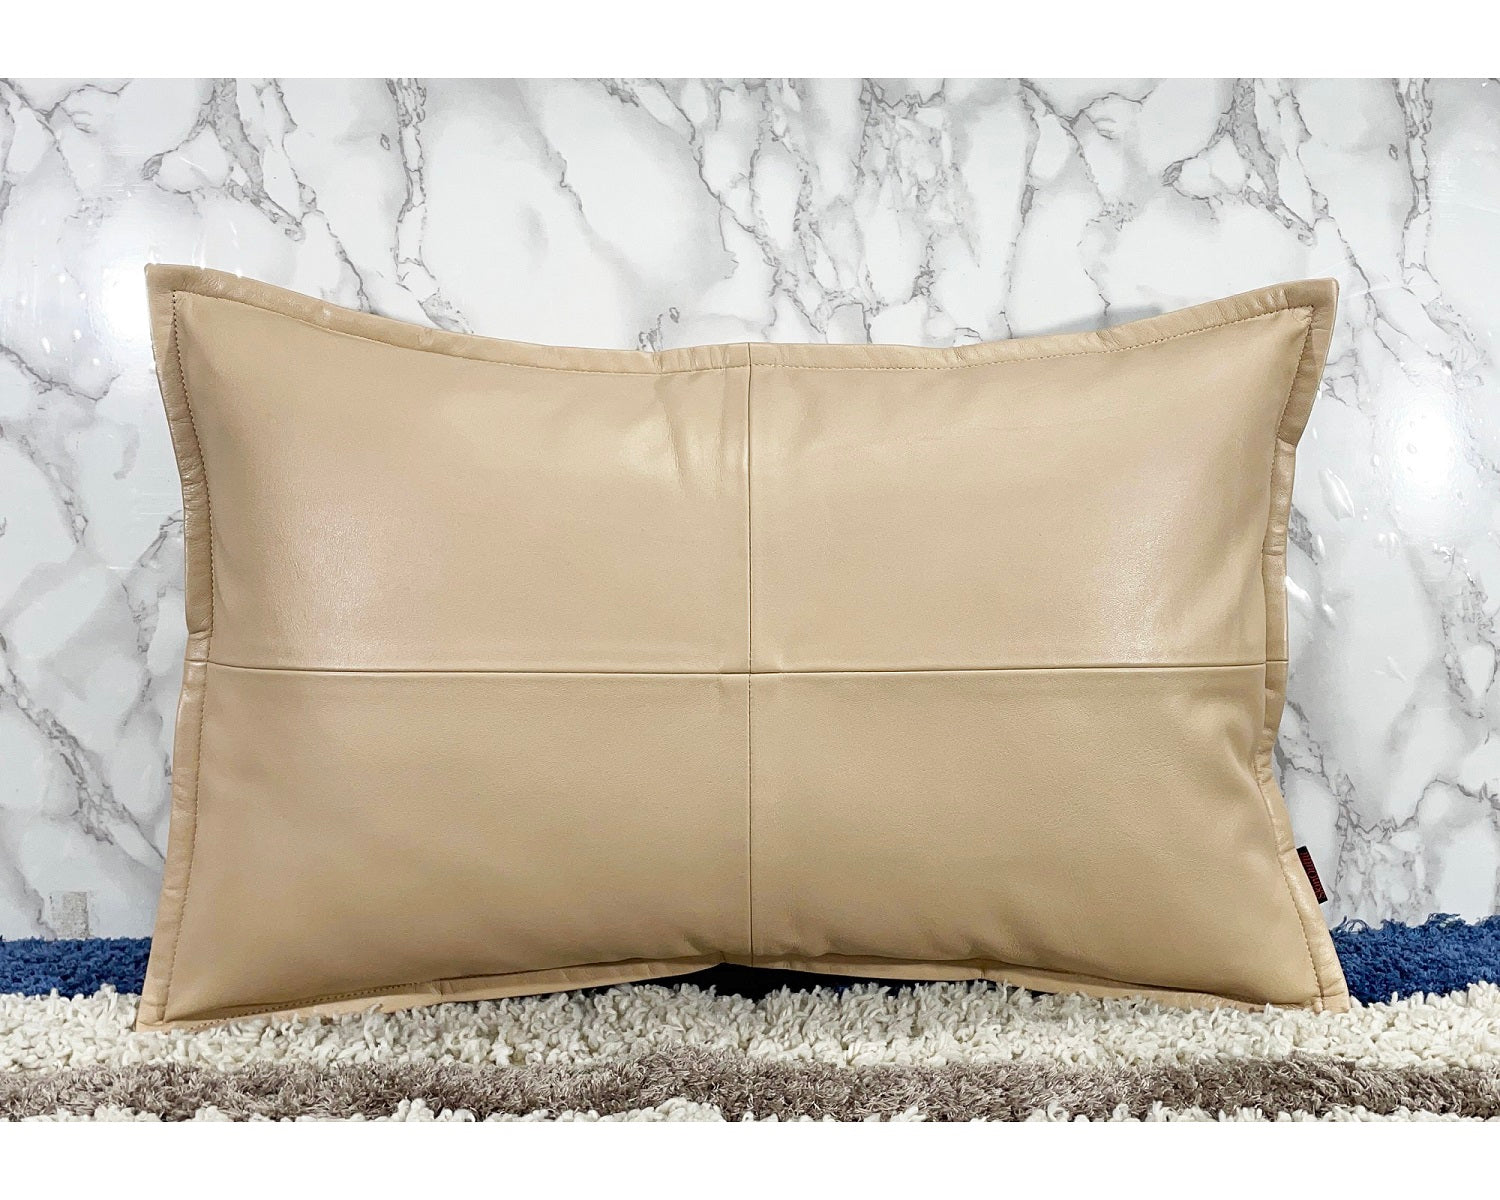 Genuine Leather Rectangle Pillow Cover 33 SkinOutfit